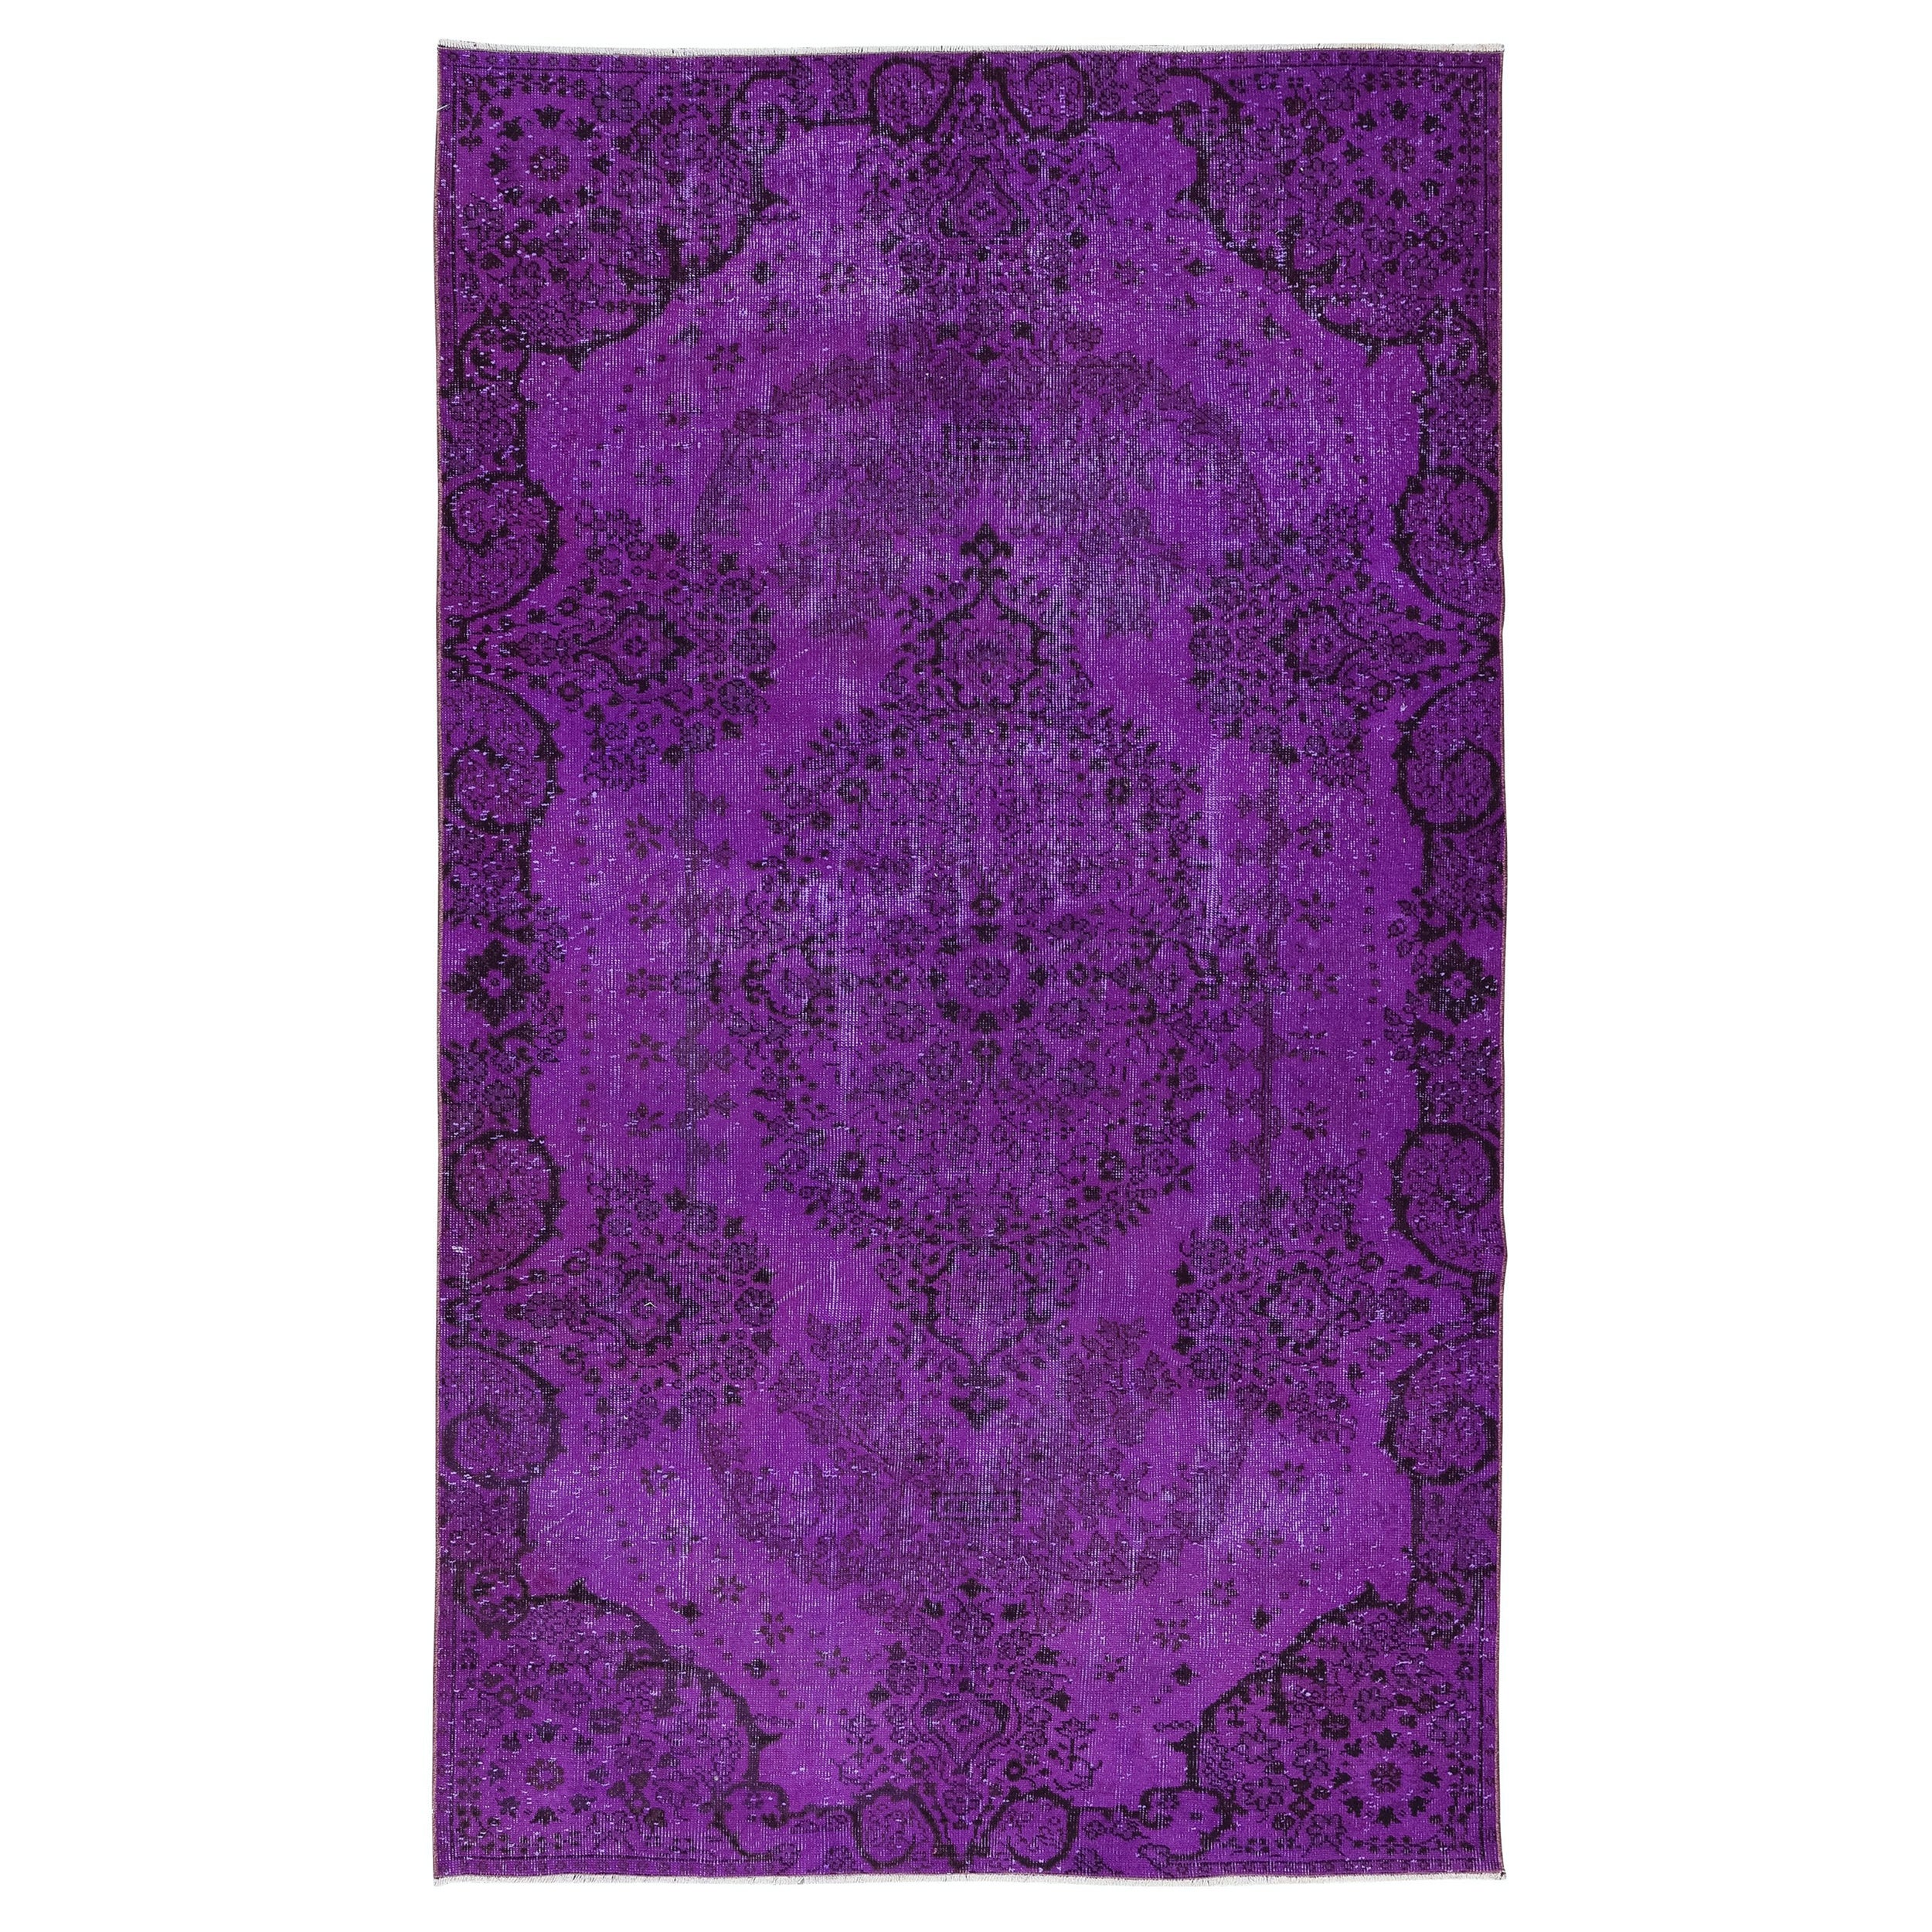 5.7x9.3 Ft Rustic Purple Handmade Room Size Rug, Upcycled Turkish Carpet For Sale